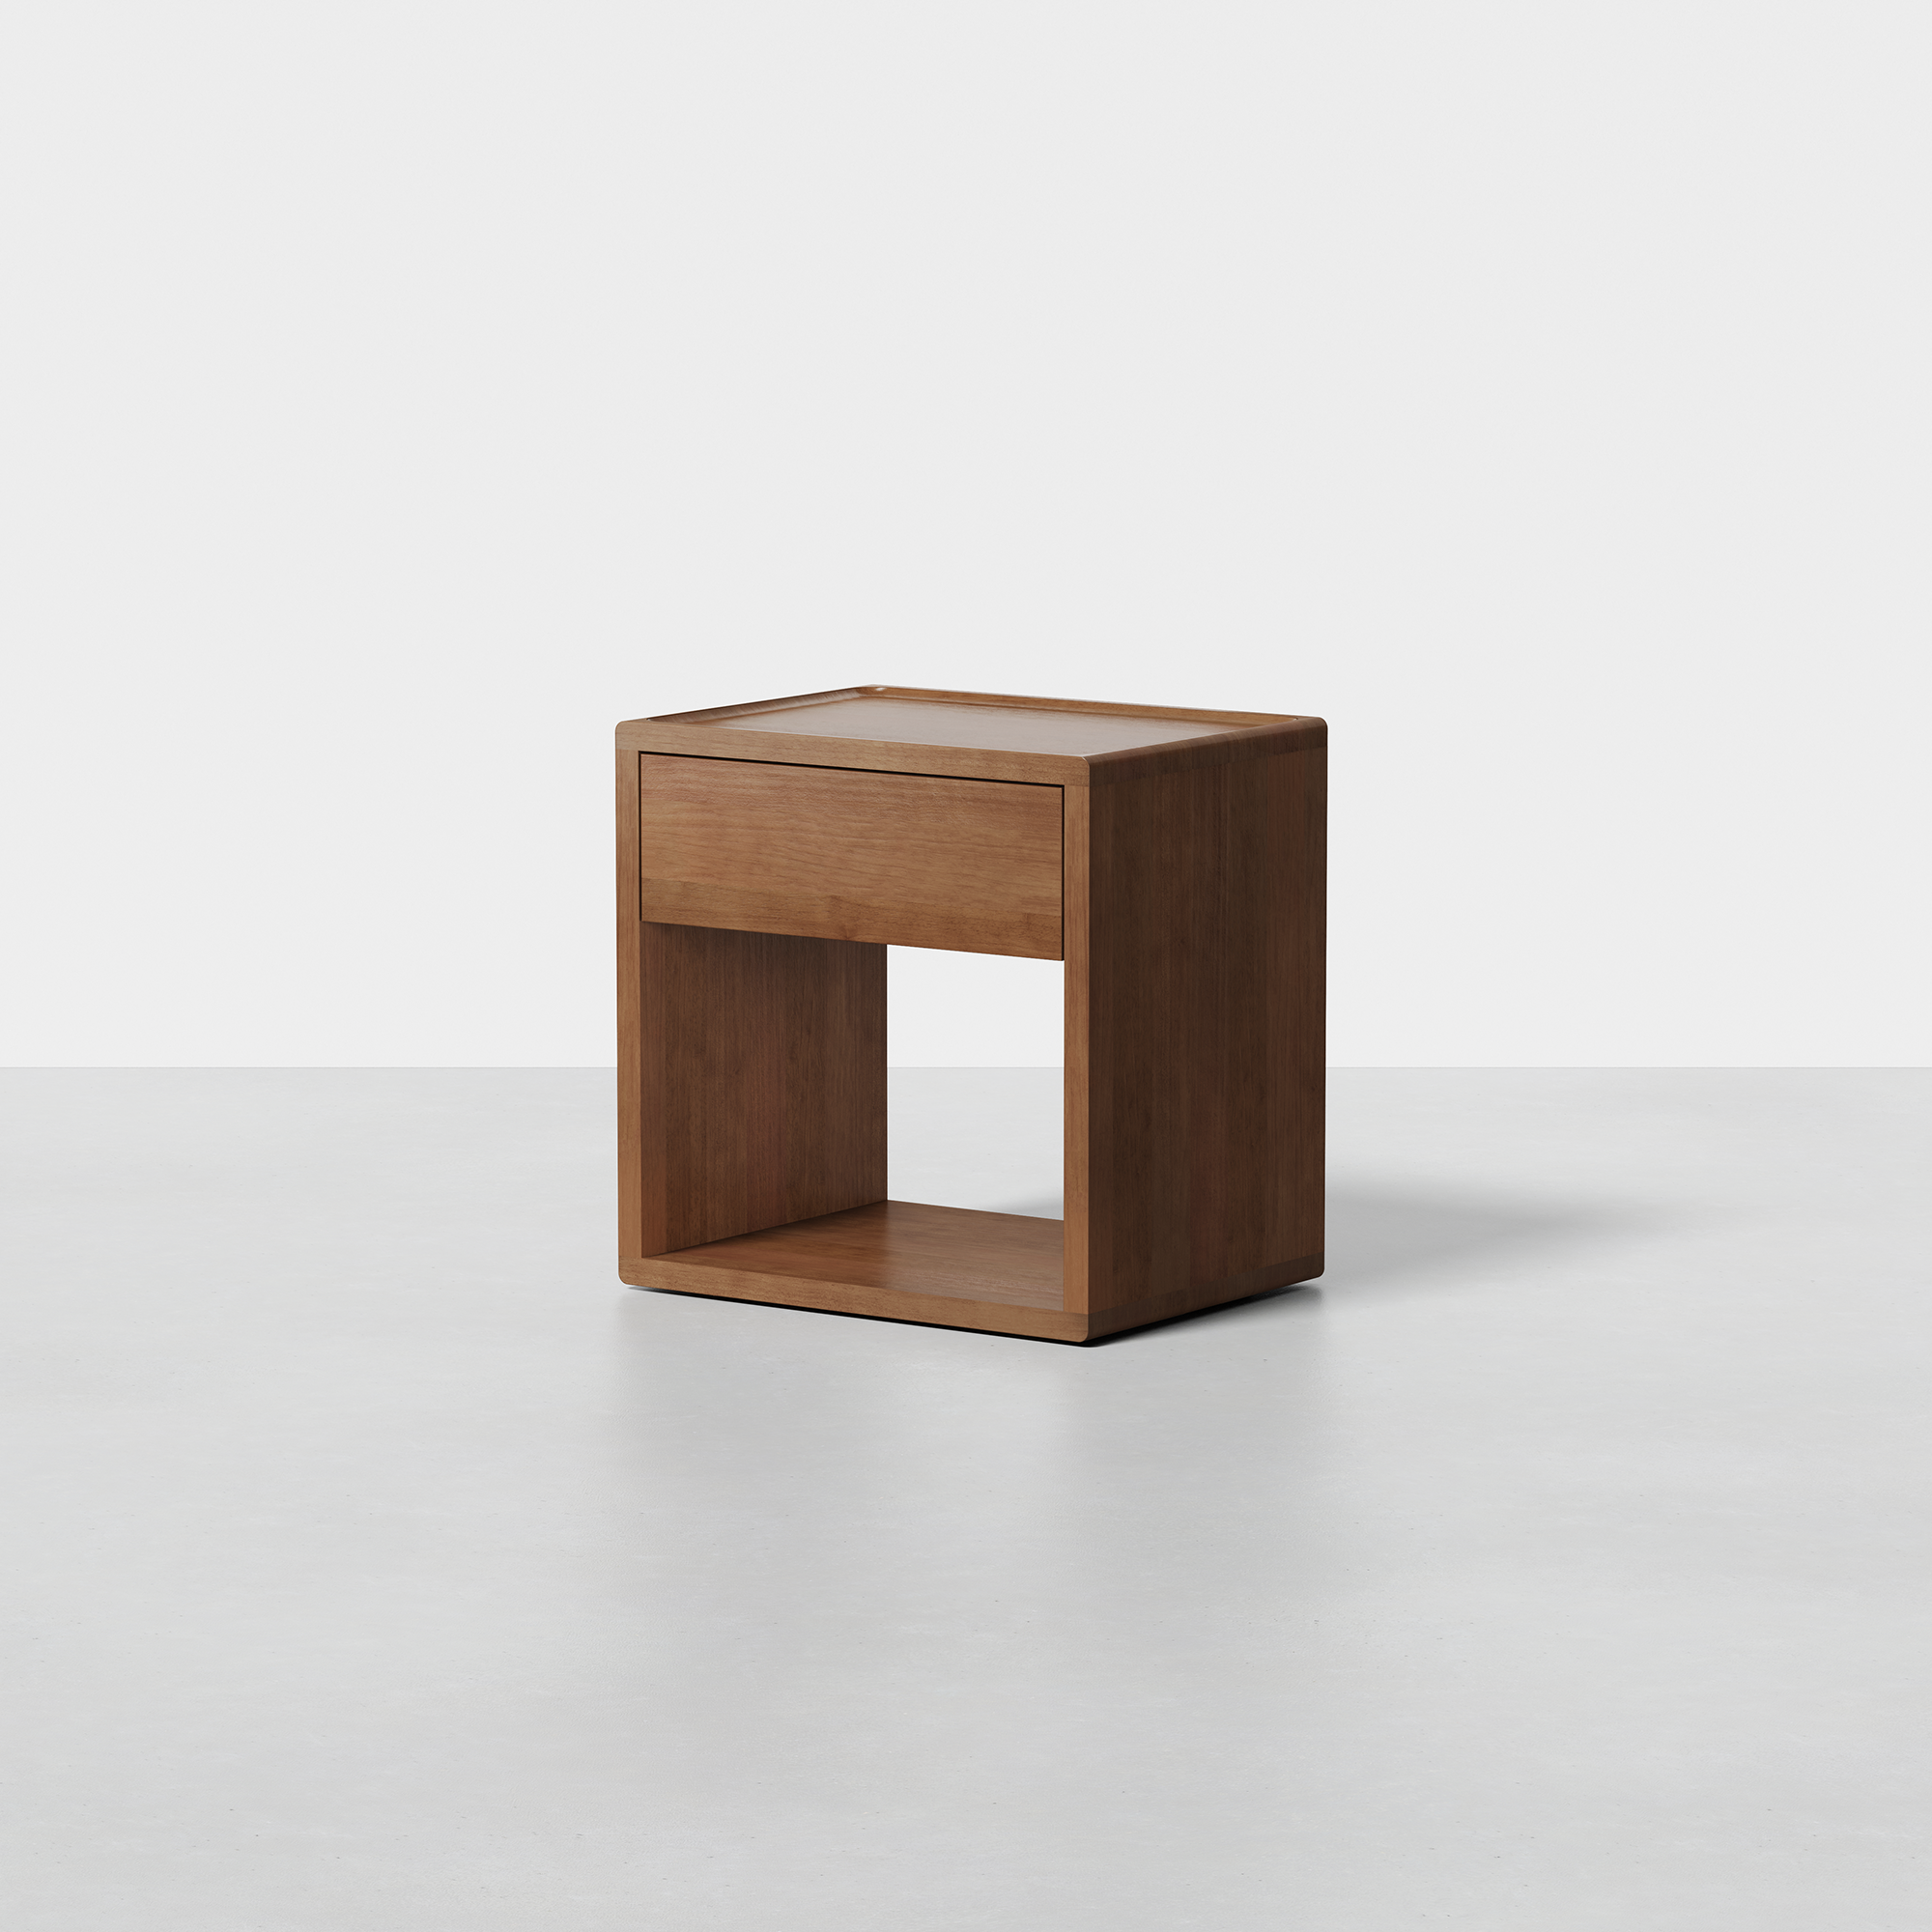 PDP Image: The Nightstand (Walnut) - Render - Side, Angled